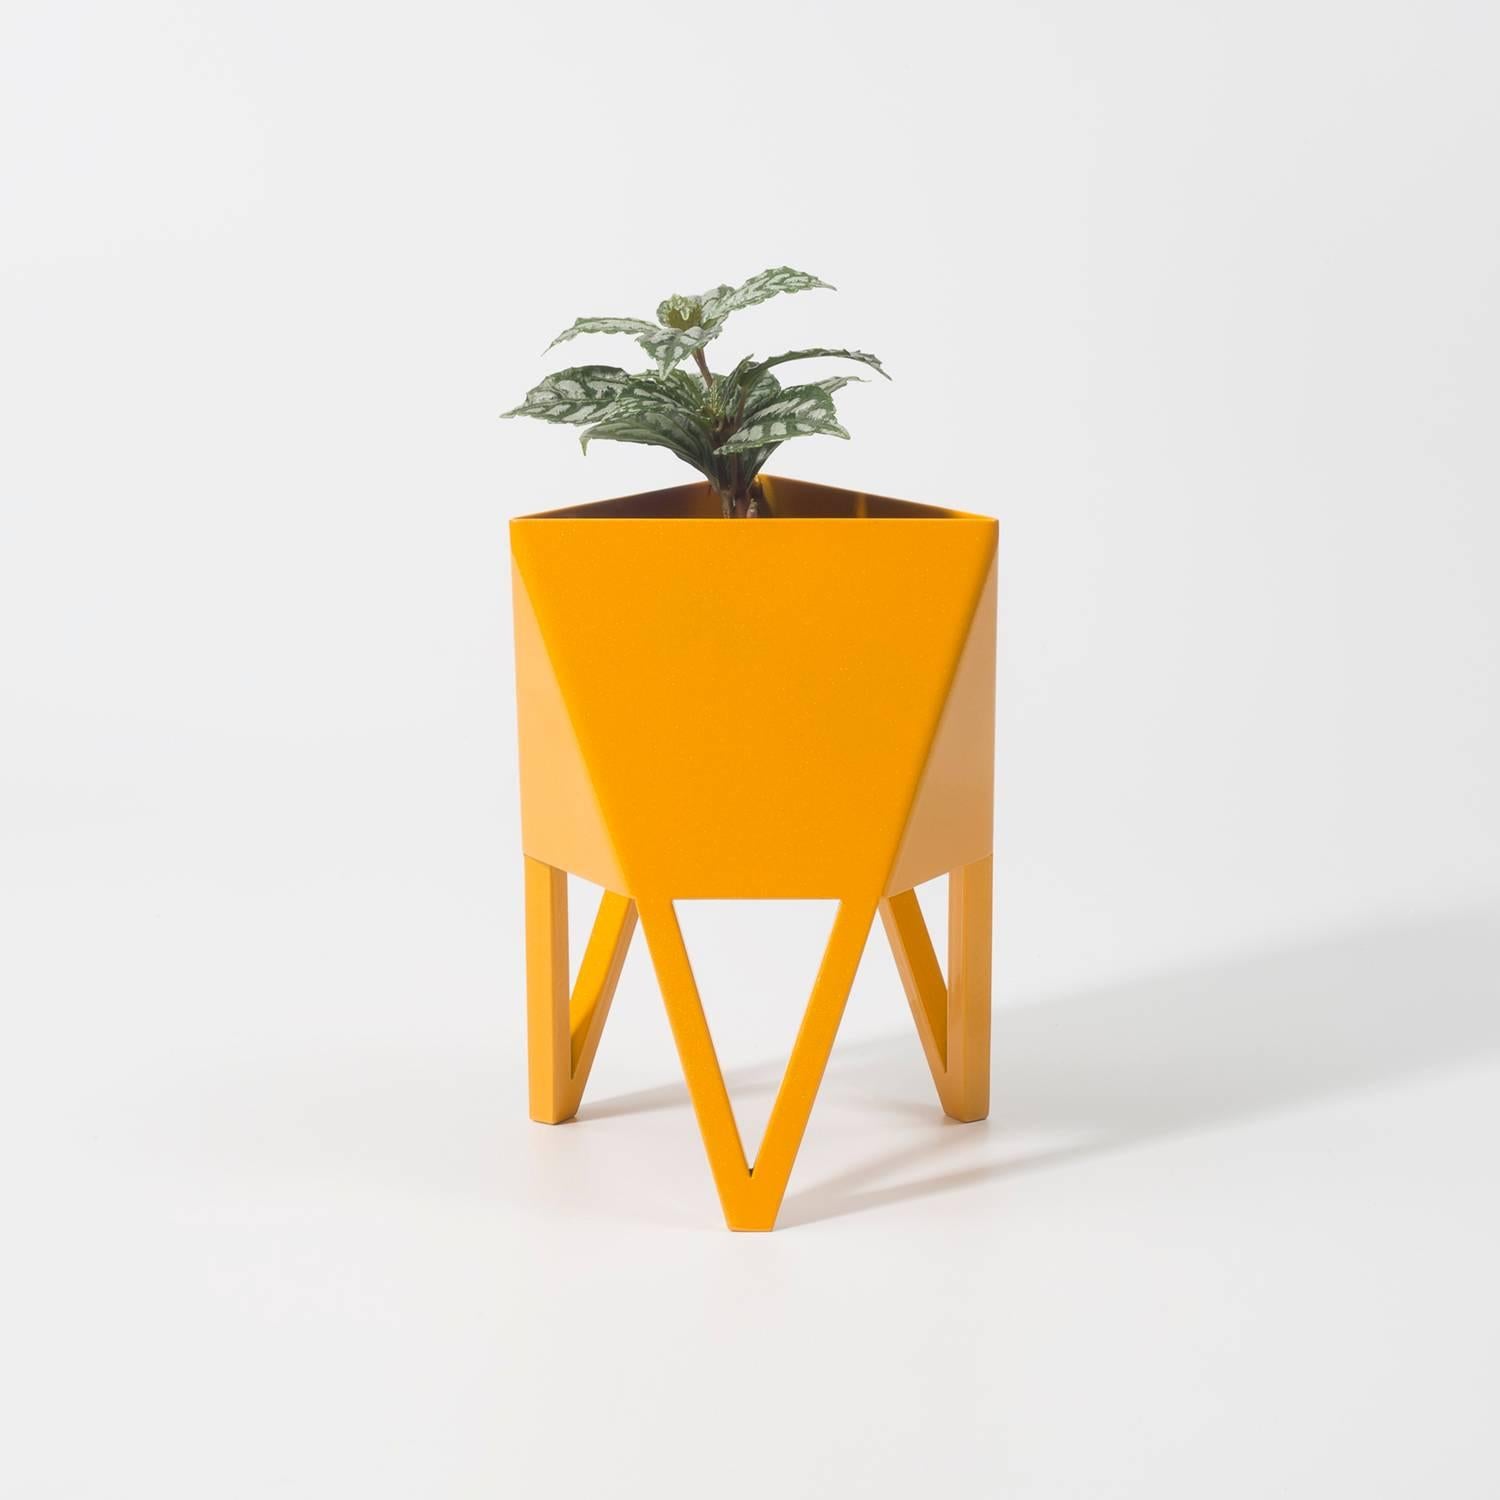 Deca Planter in Living Coral Steel, Small, by Force/Collide 2